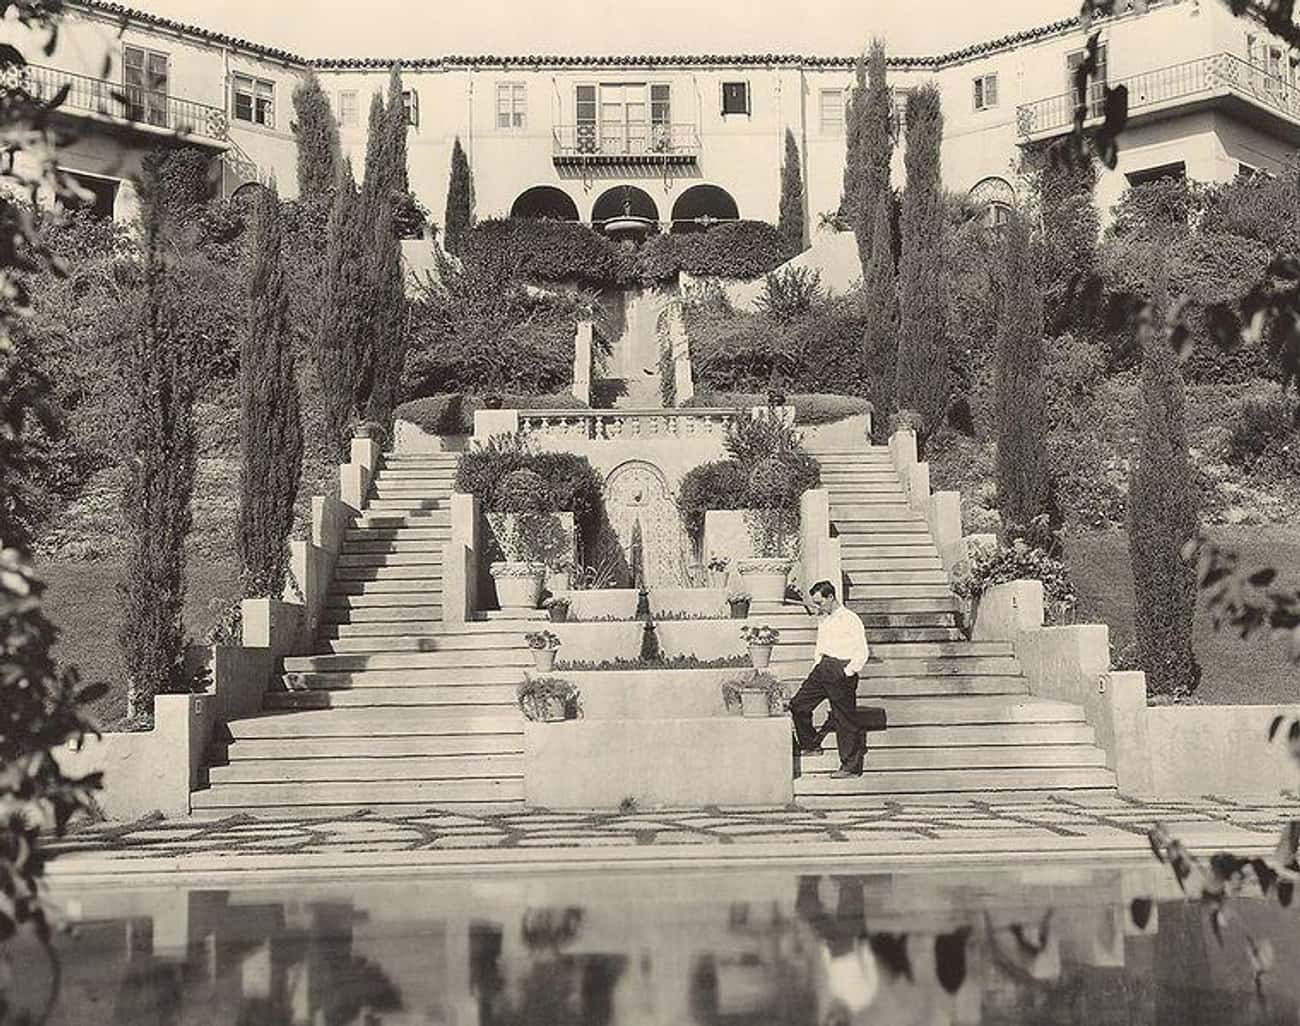 Buster Keaton Built His Wife A Nearly 11,000-Square-Foot Mansion With $14,000 Worth Of Palm Trees